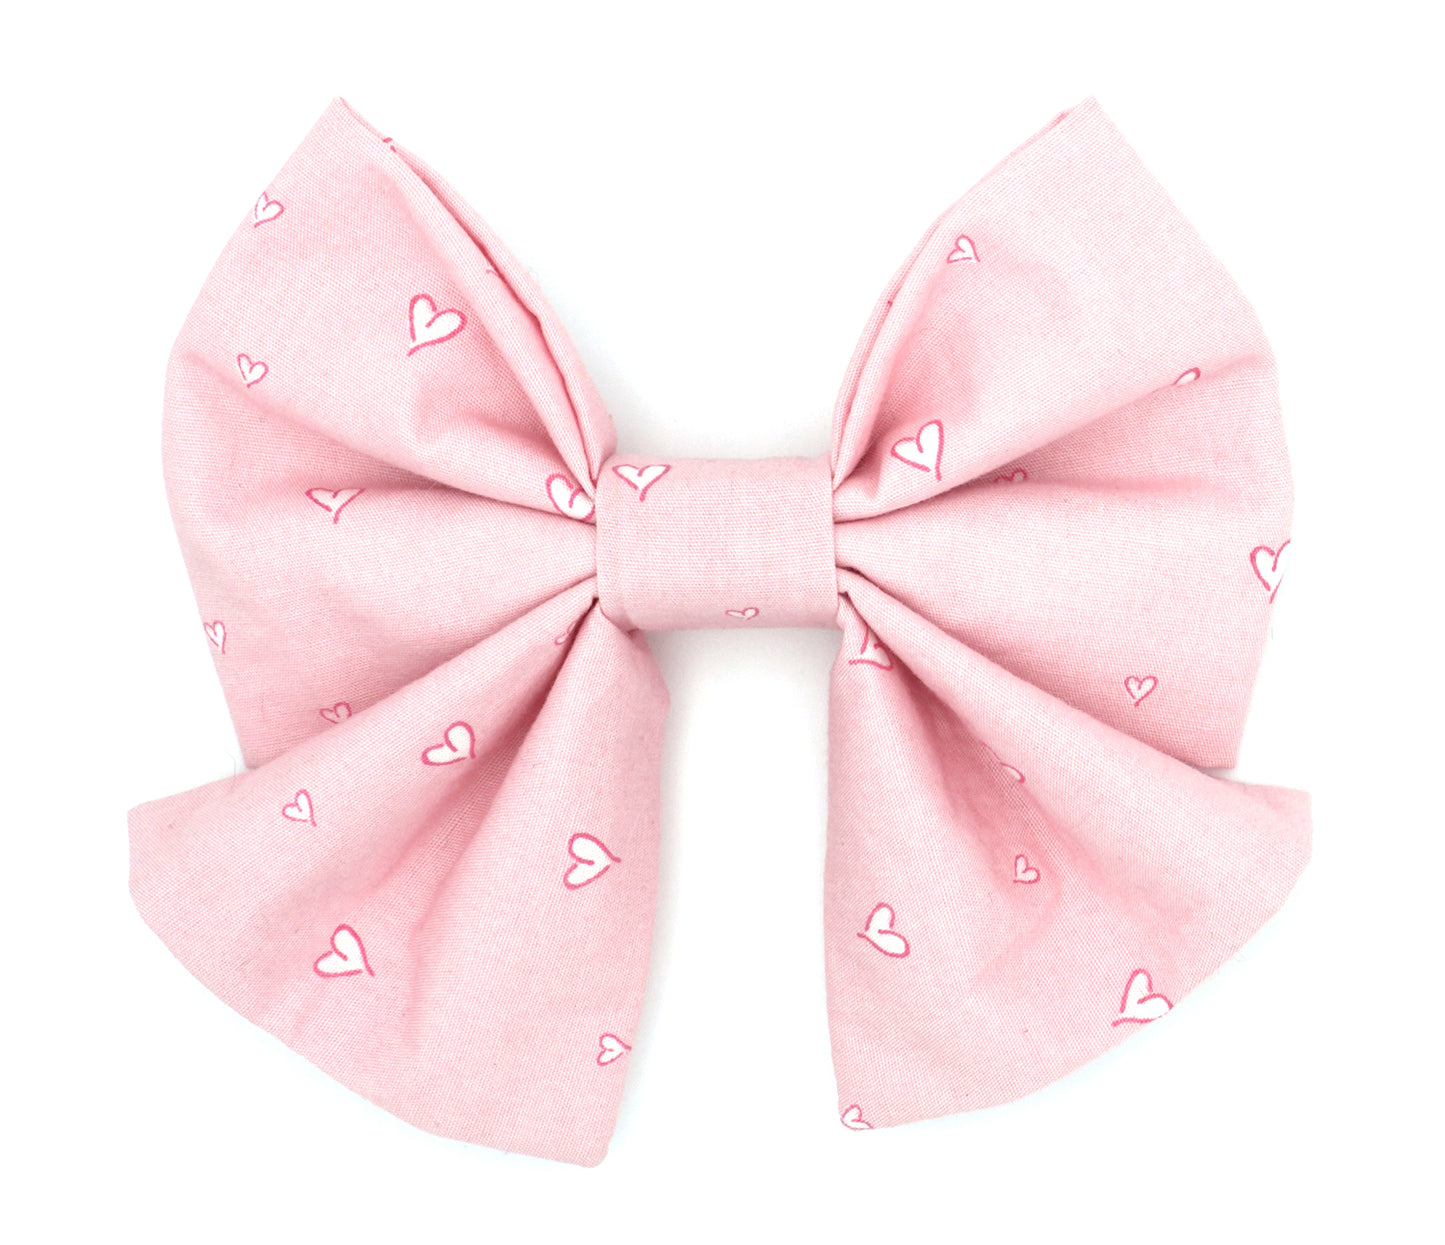 Handmade cotton bow tie with tails for dogs (or other pets). Elastic straps on back with snaps make it easy to add to collar, harness, or leash. Light pink background with hot pink and white hearts.